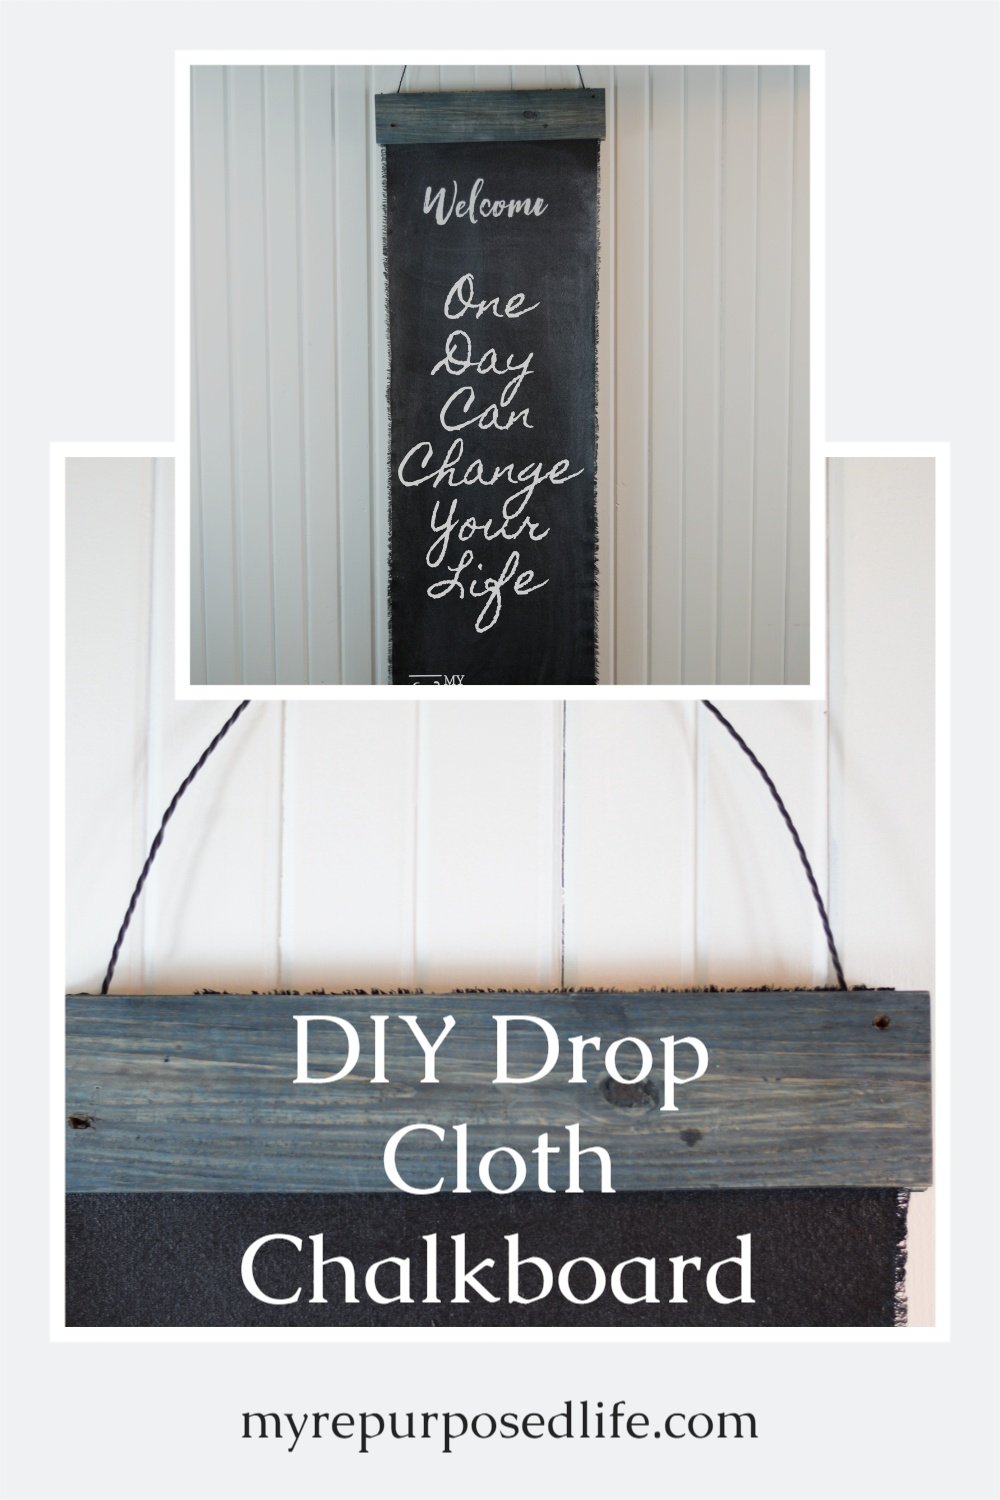 How to make a drop cloth chalkboard. paint on the chalkboard paint, add pallet boards for hanging. A twisted wire hanger completes the rustic looking chalkboard. #MyRepurposedLife #upcycle #dropcloth #chalkboard #pallets via @repurposedlife